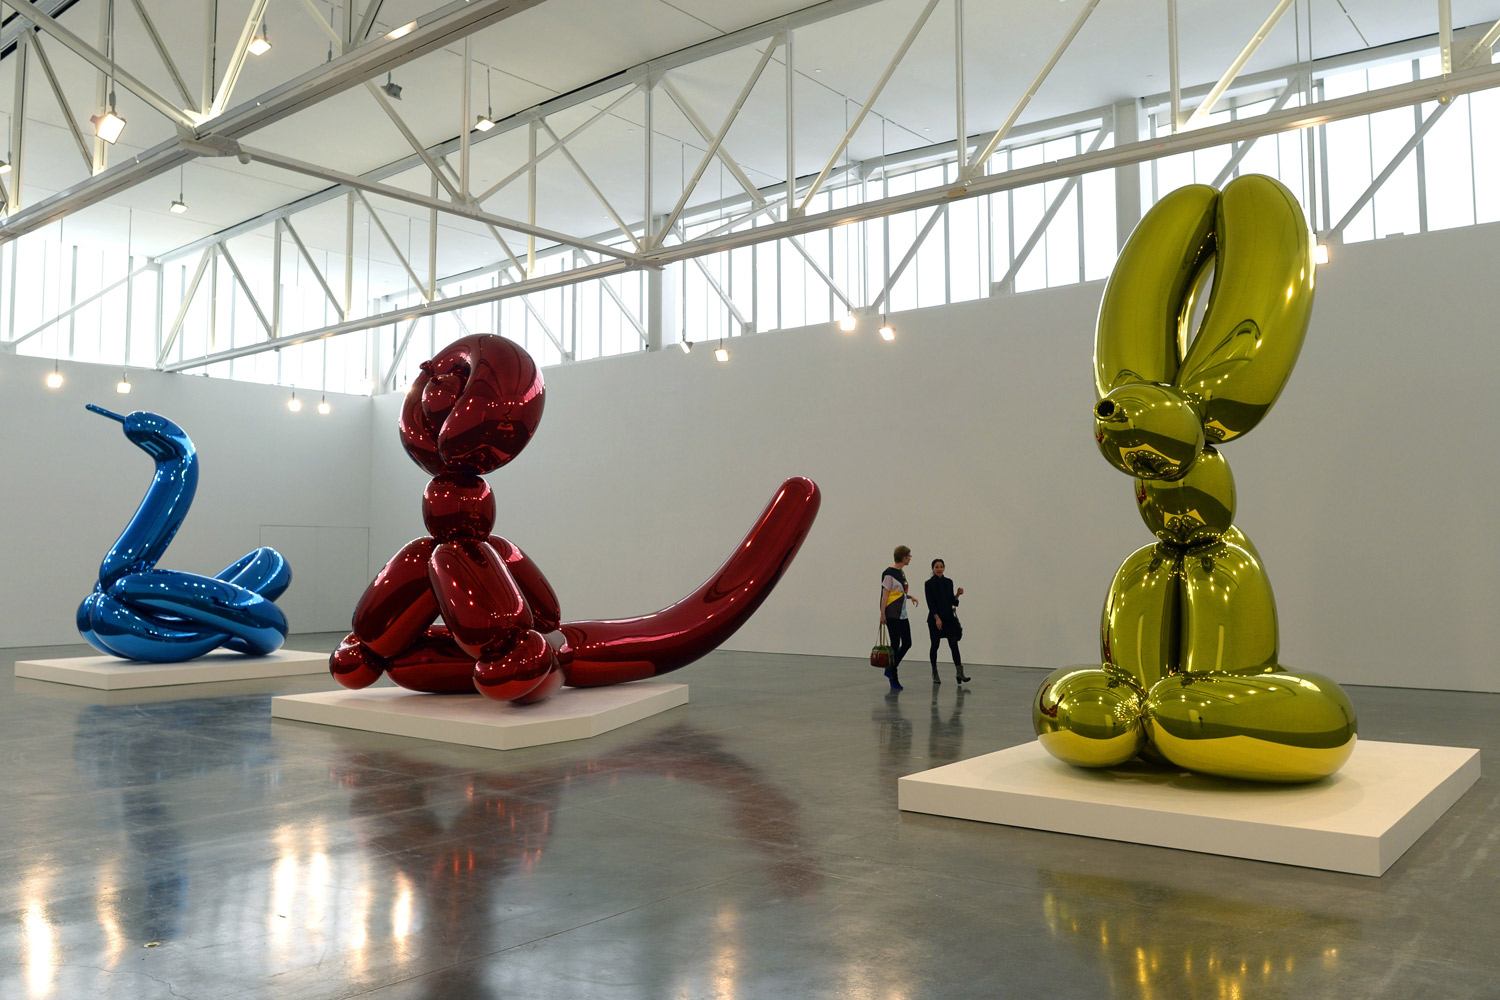 Andrew Halliday Imperial Strikt Jeff Koons' $58.4M Orange Balloon Dog and 10 Other Cool Balloon Pieces |  TIME.com